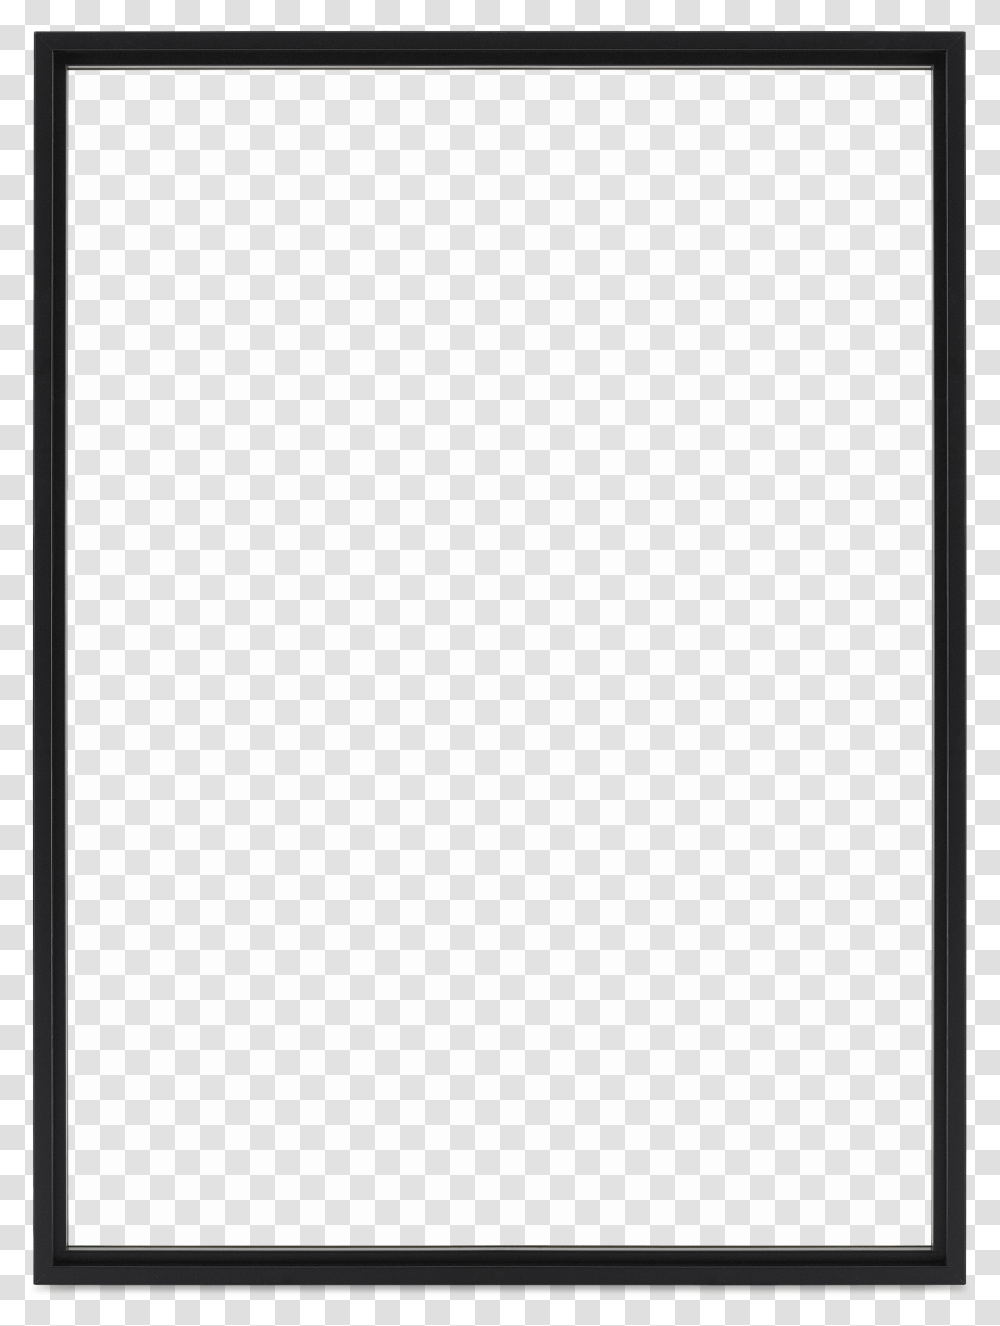 Wedding Greeting CardData Max Width 1500Data Heart, White Board, Screen, Electronics, Rug Transparent Png